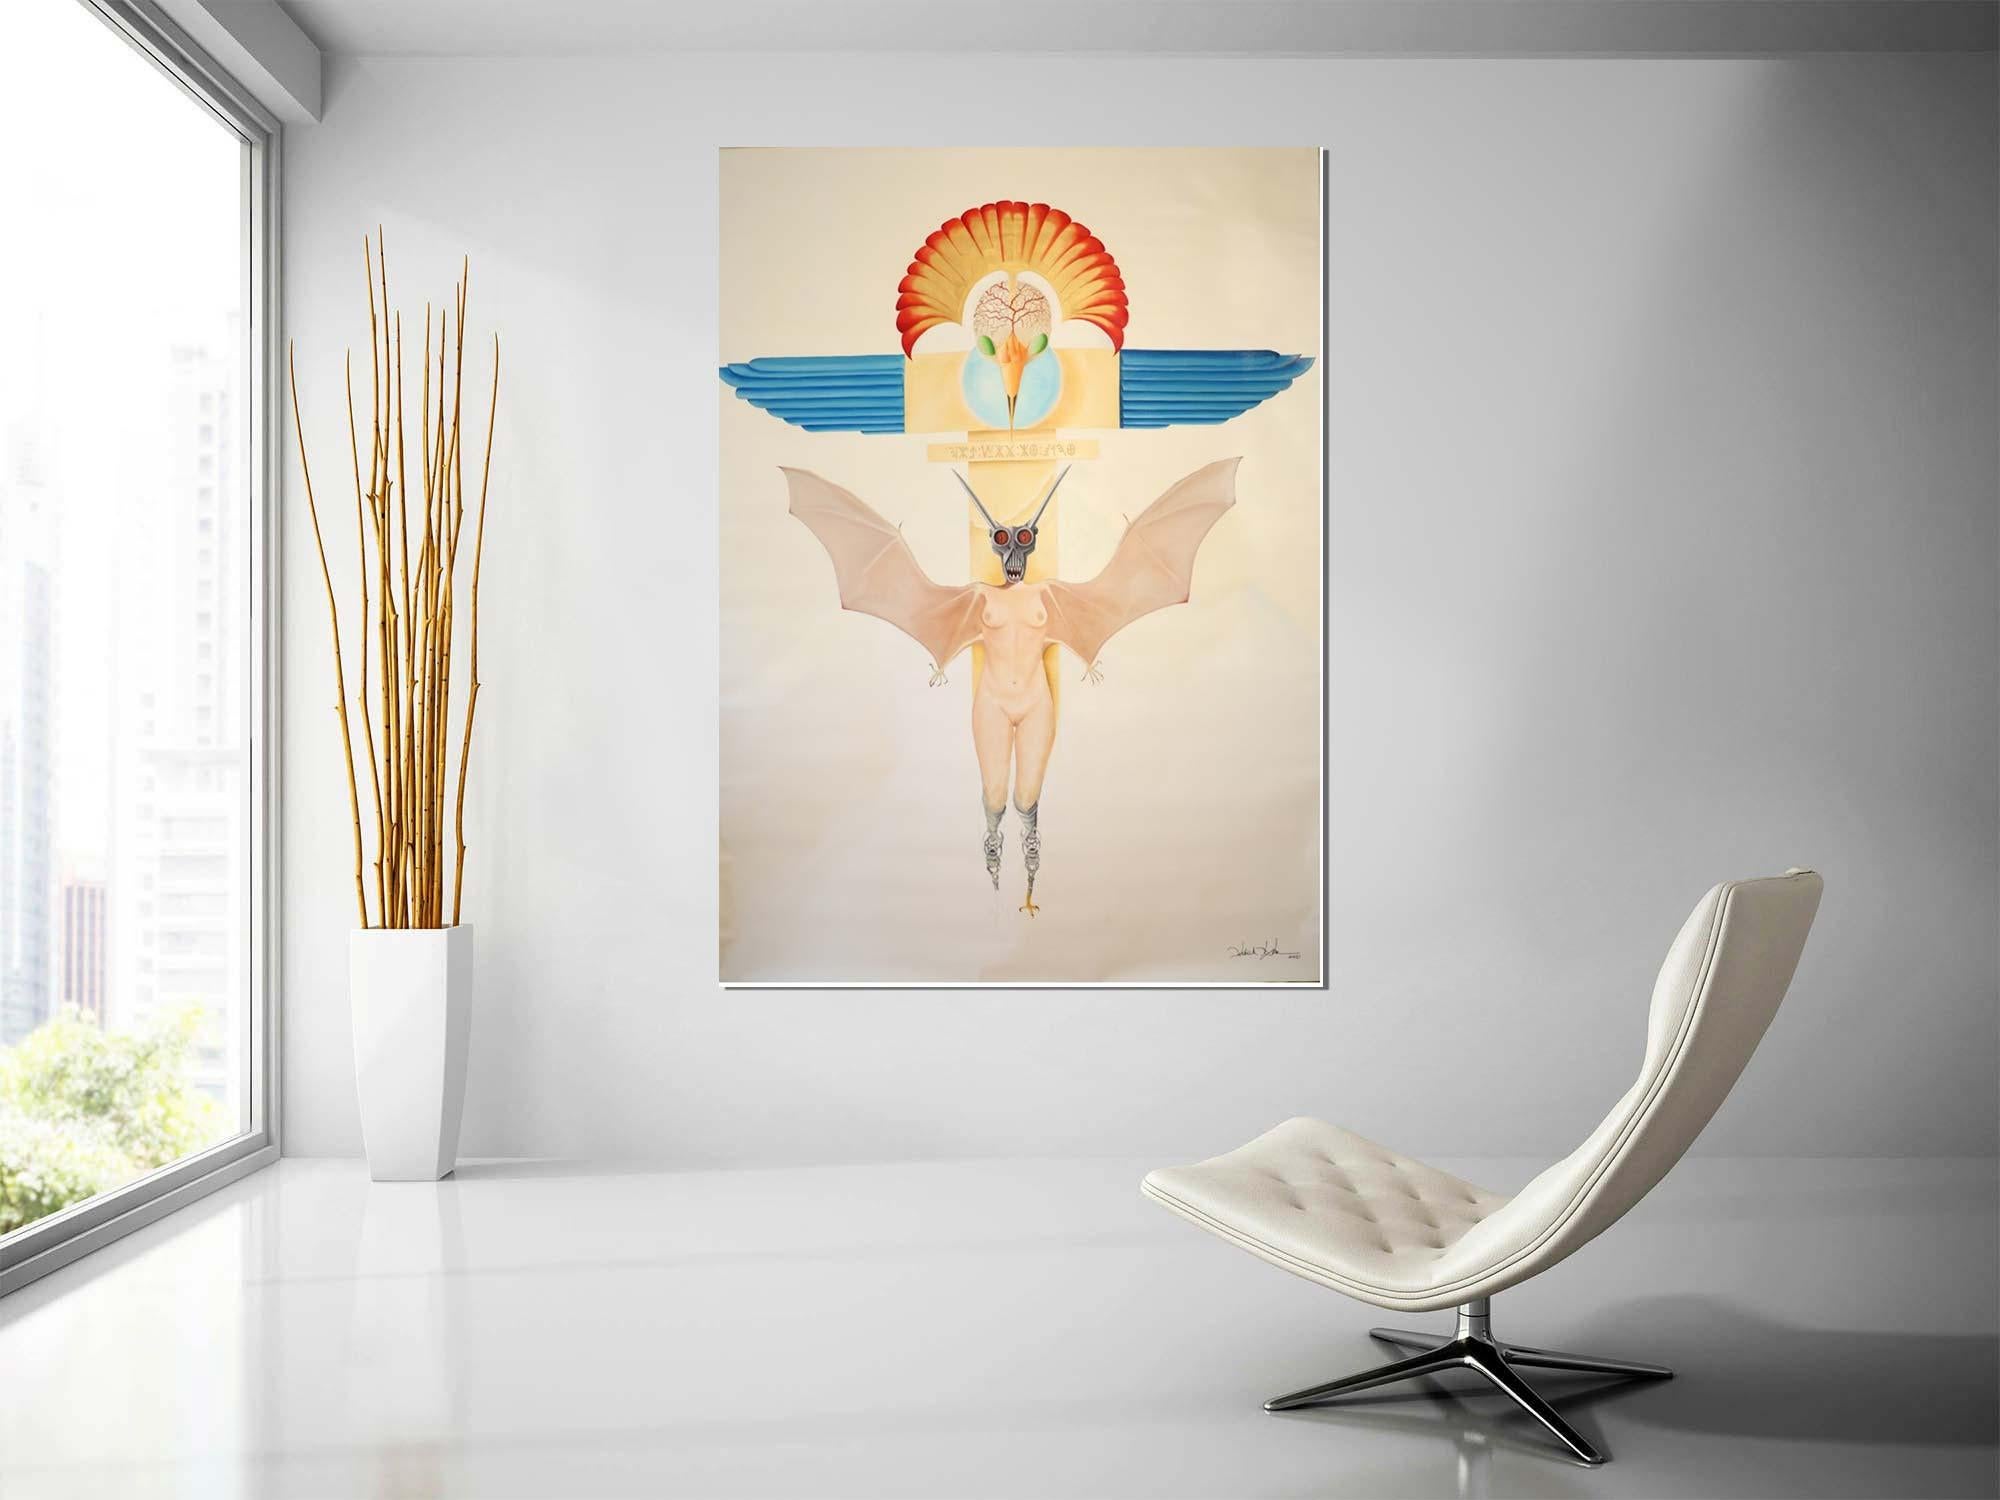 This painting is artwork of Patrick Faure, Creator of Faurism. The painting is unframed, oil on canvas. 

About the Artwork: 
Wings of Fascism is a perfect example of Faurism, a style that expresses the convergence of dreams, sexual desire,